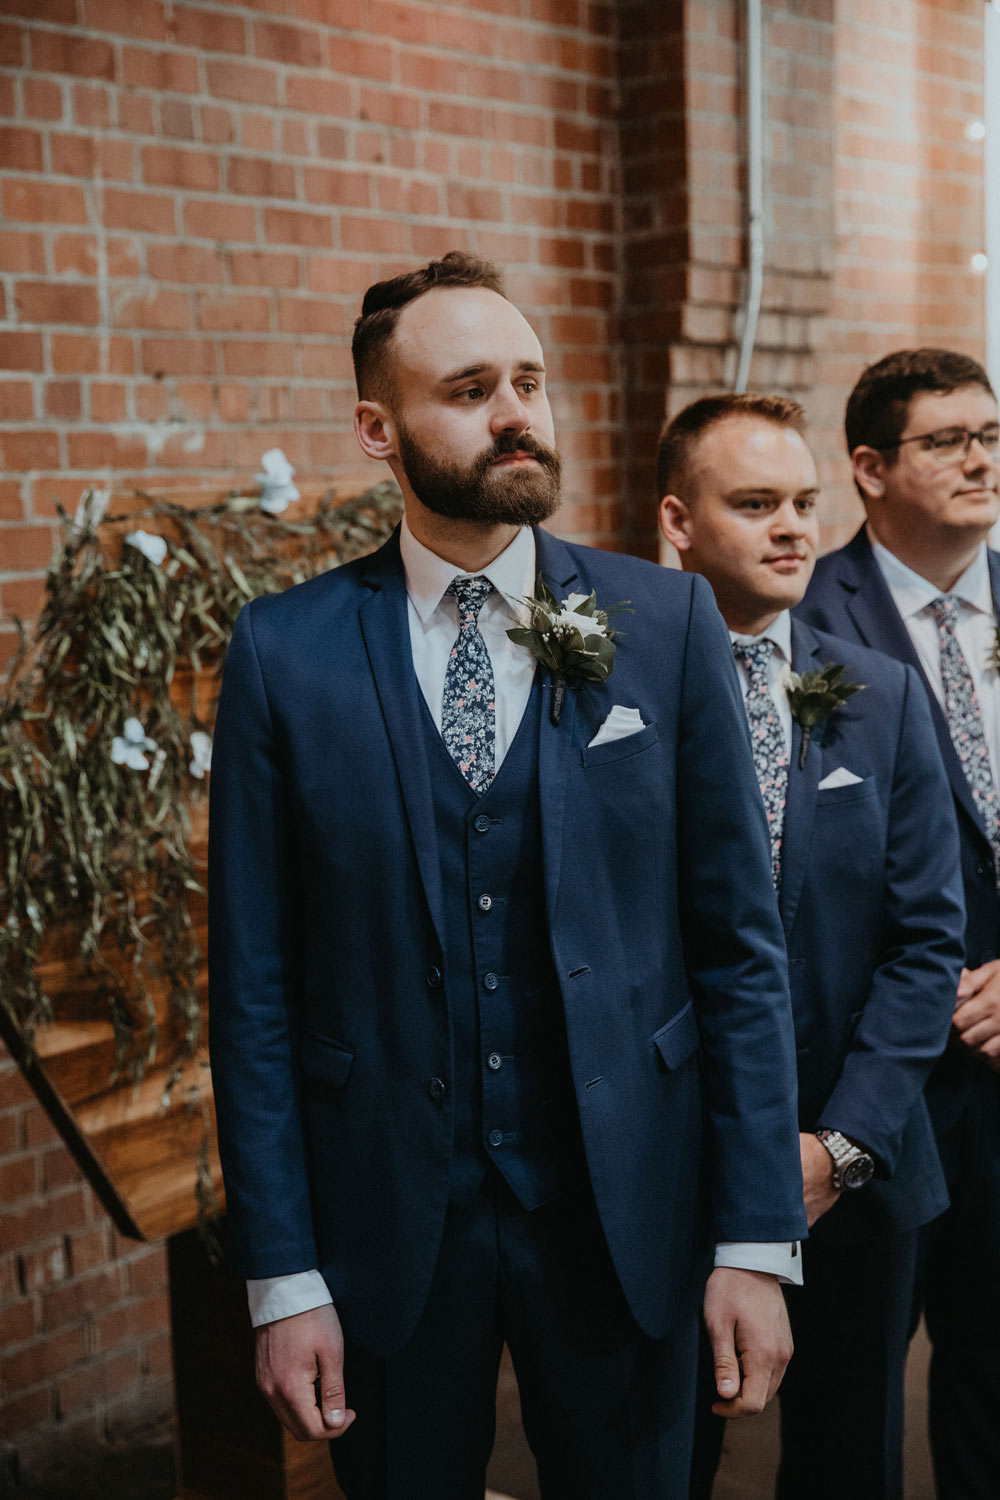 Atlanta tie worn by three groomsmen at a wedding with white shirts and navy blue suits. 